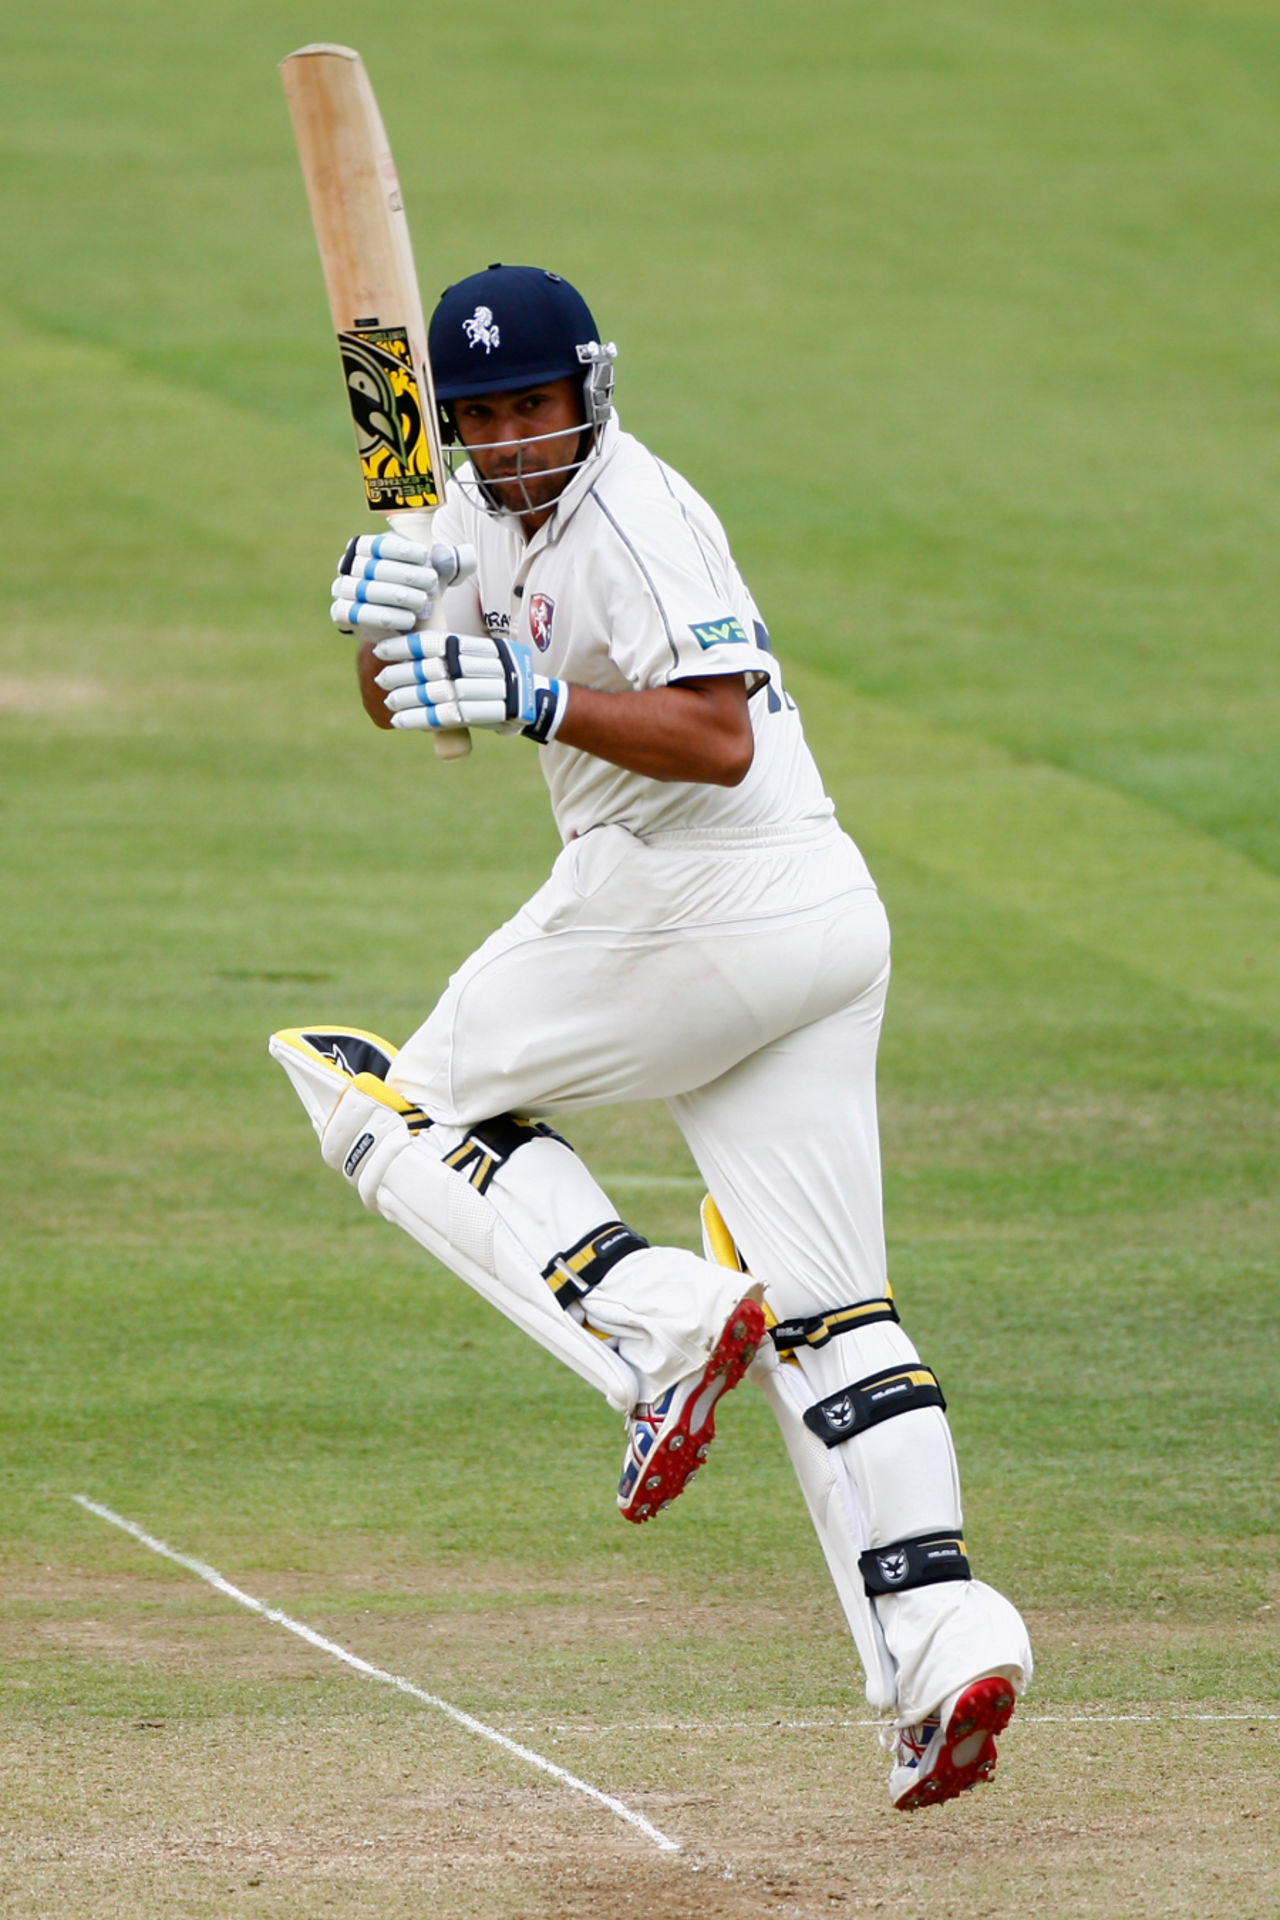 Azhar Mahmood's unbeaten fifty held Kent's second innings together, Middlesex v Kent, Lord's, 2nd day, June 20 2011